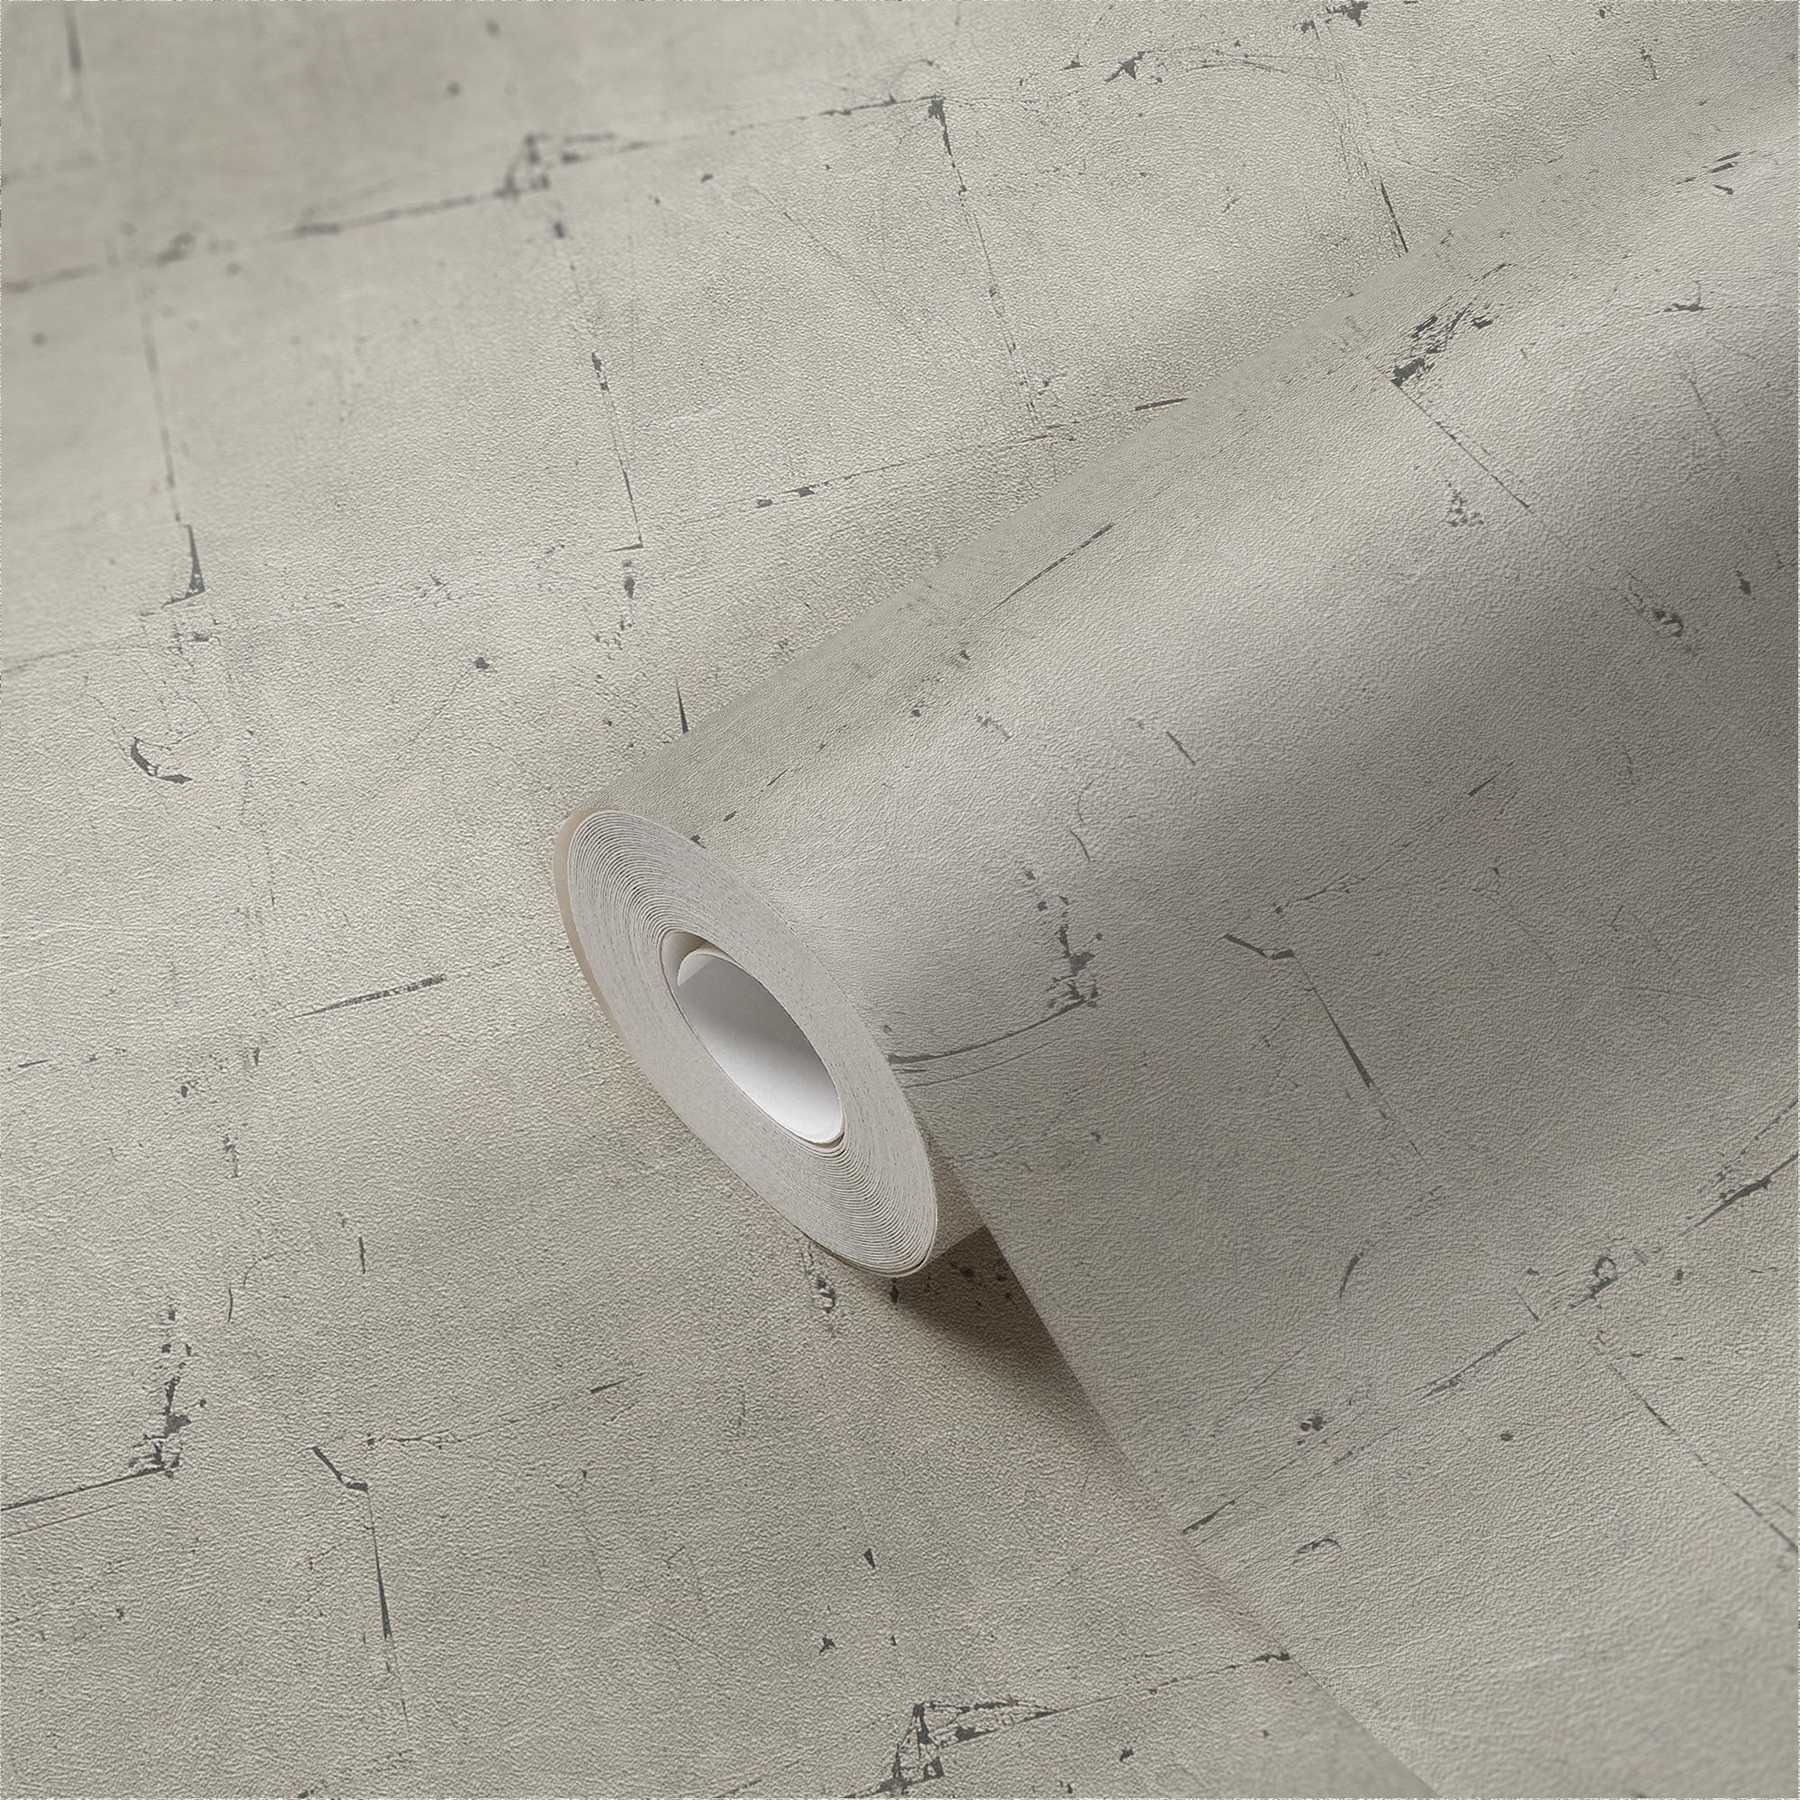             Stone look wallpaper with texture pattern - grey, beige
        